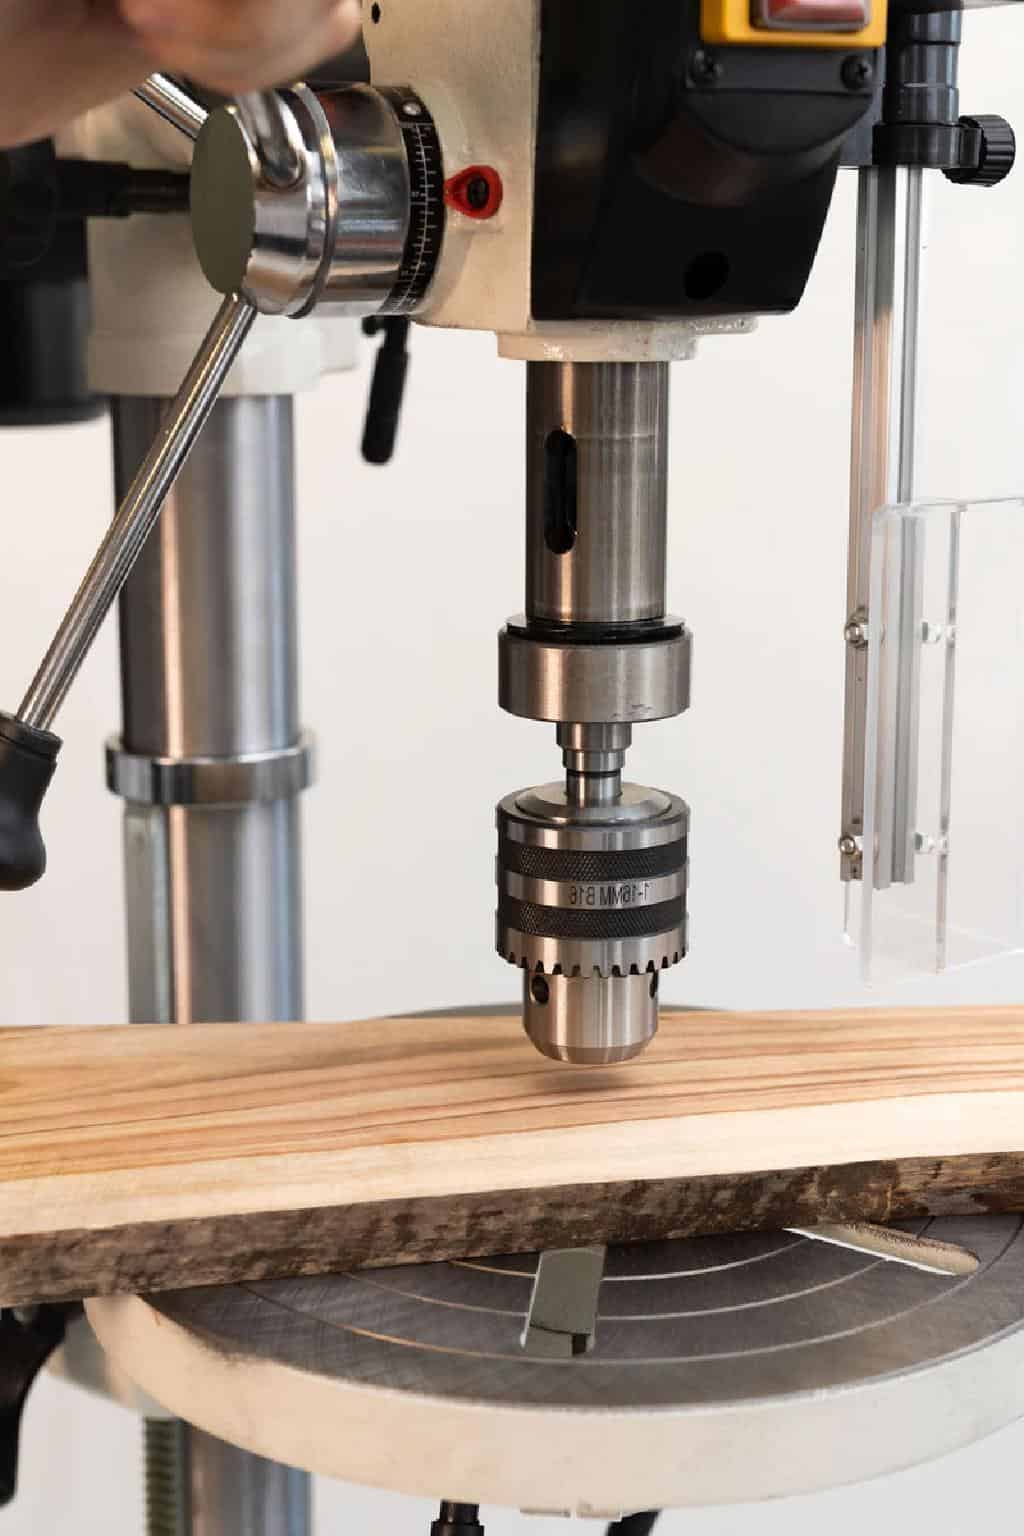 What Is an Oscillating Drill Press? How is it Different from a Radial Press?